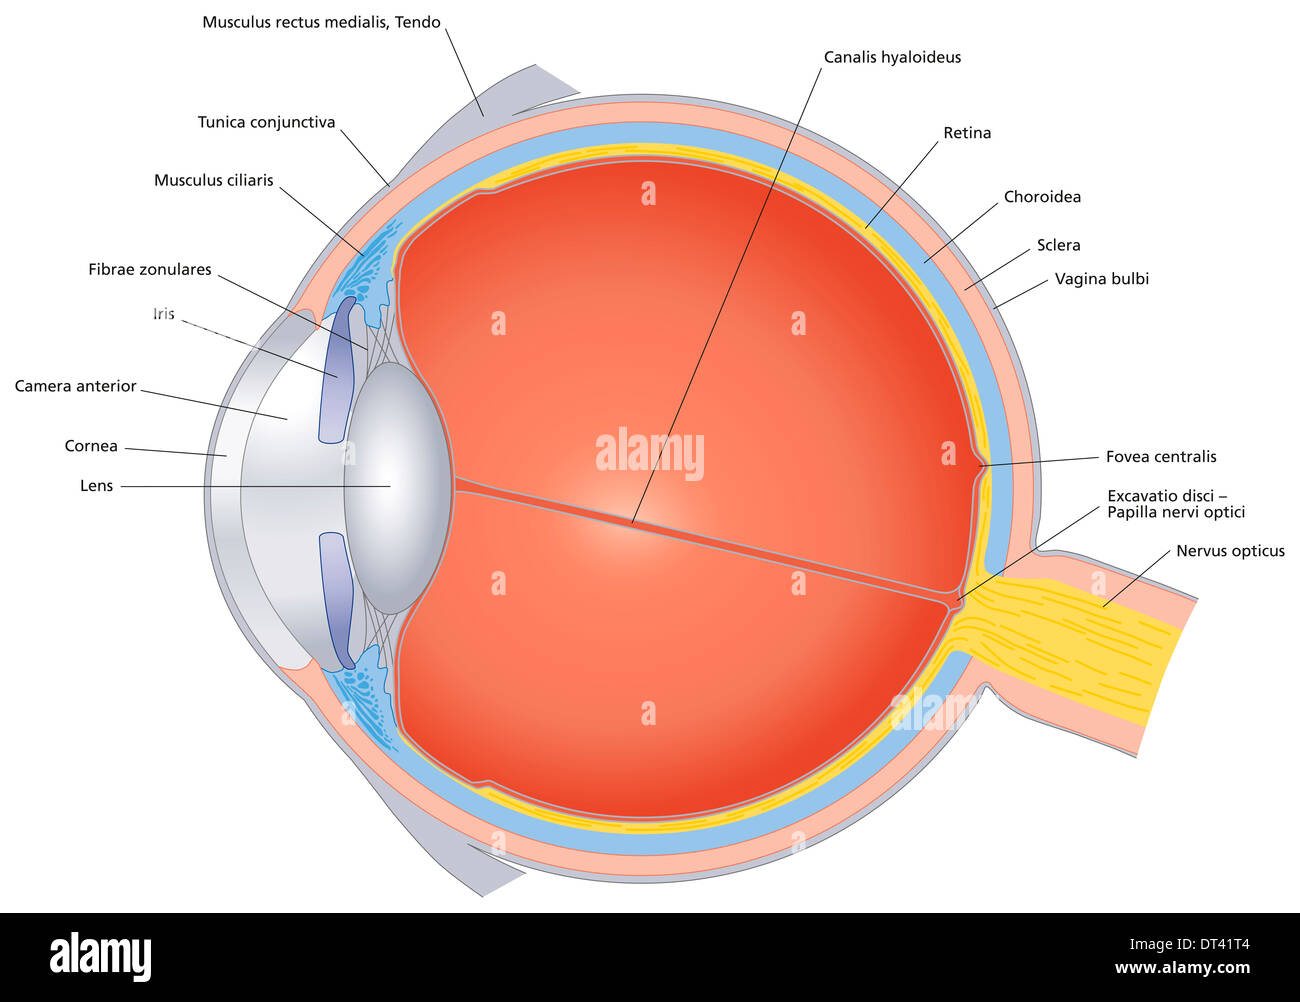 Isolated Illustration Of The Human Eye With Latin Labeling